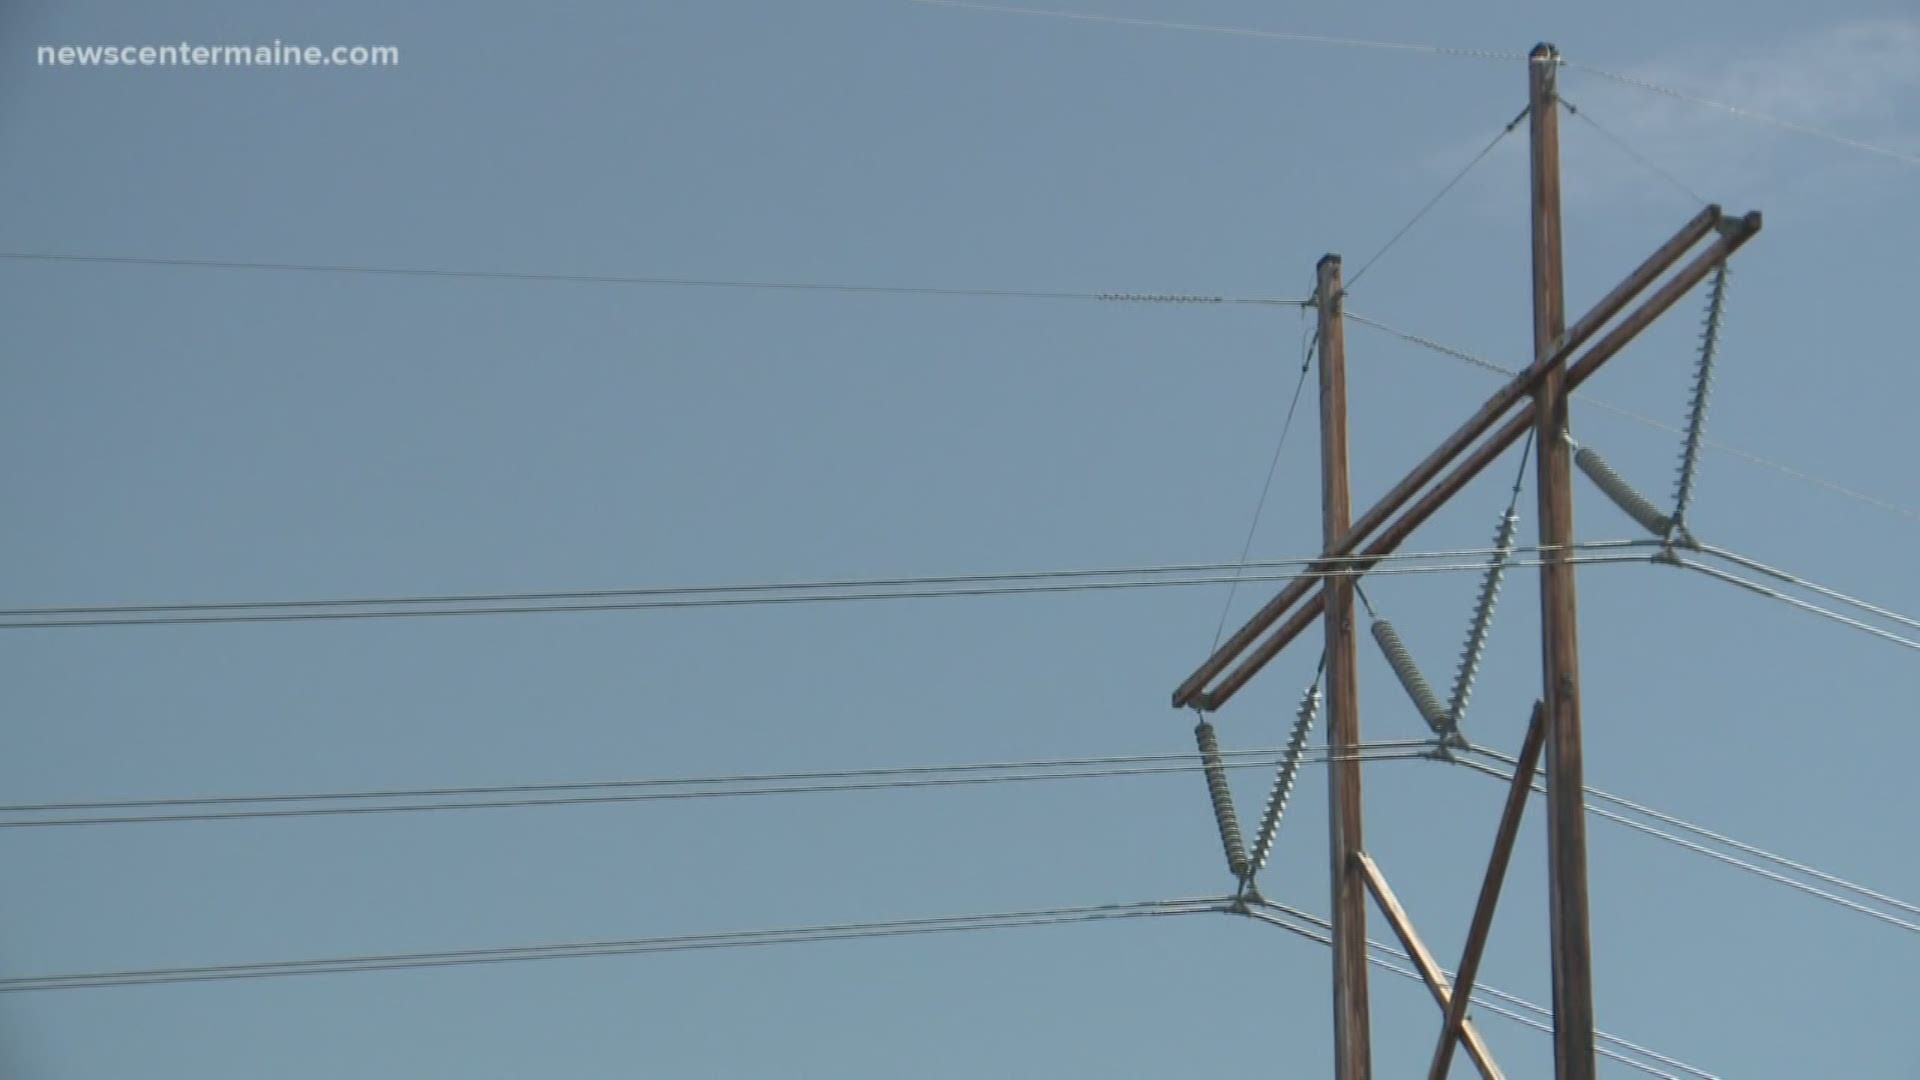 CMP decides to bury the proposed transmission line